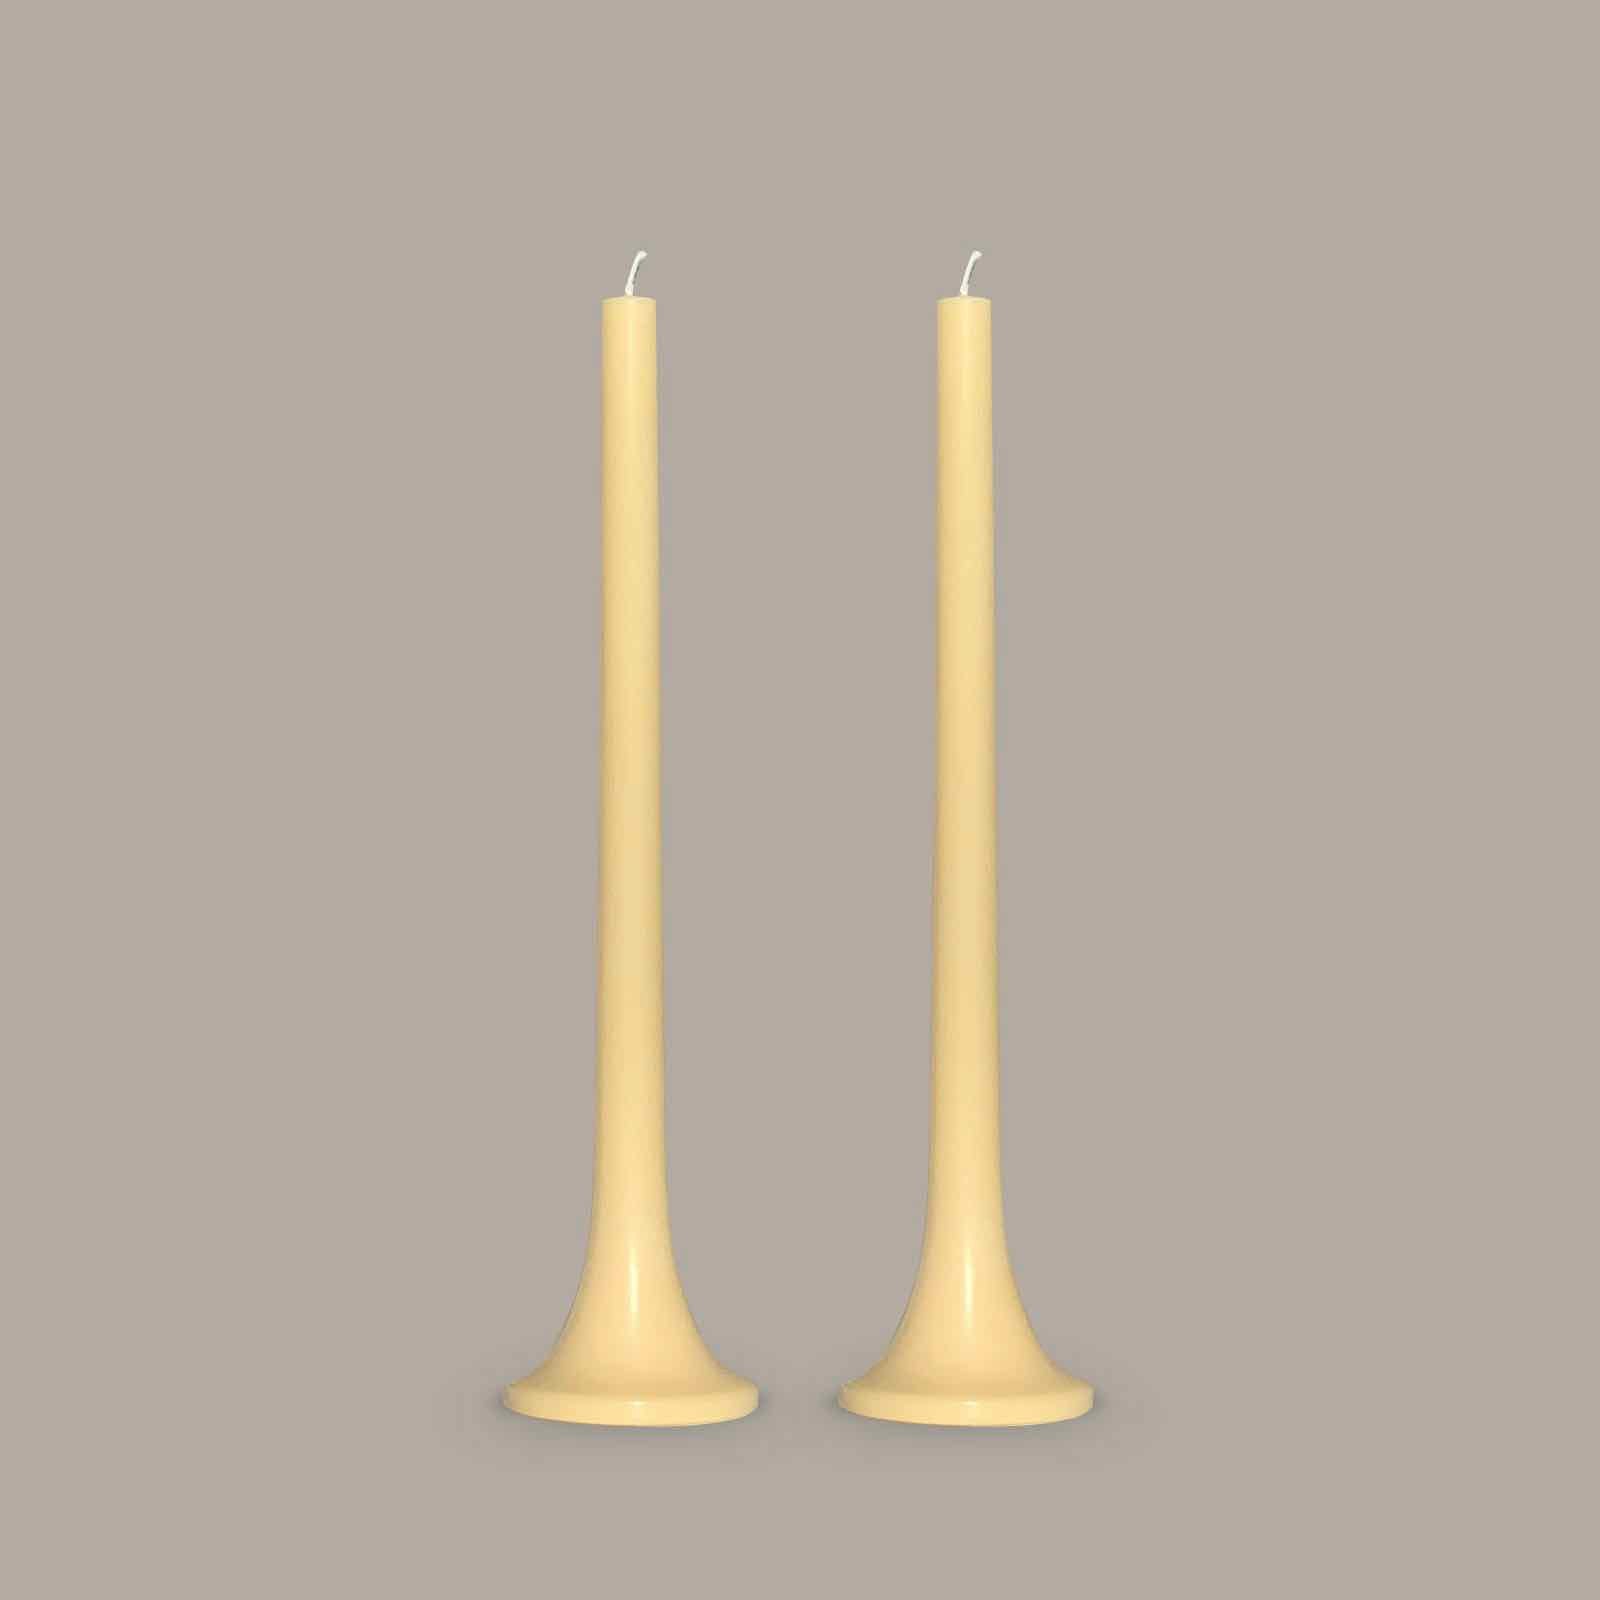 Soft yellow taper candles